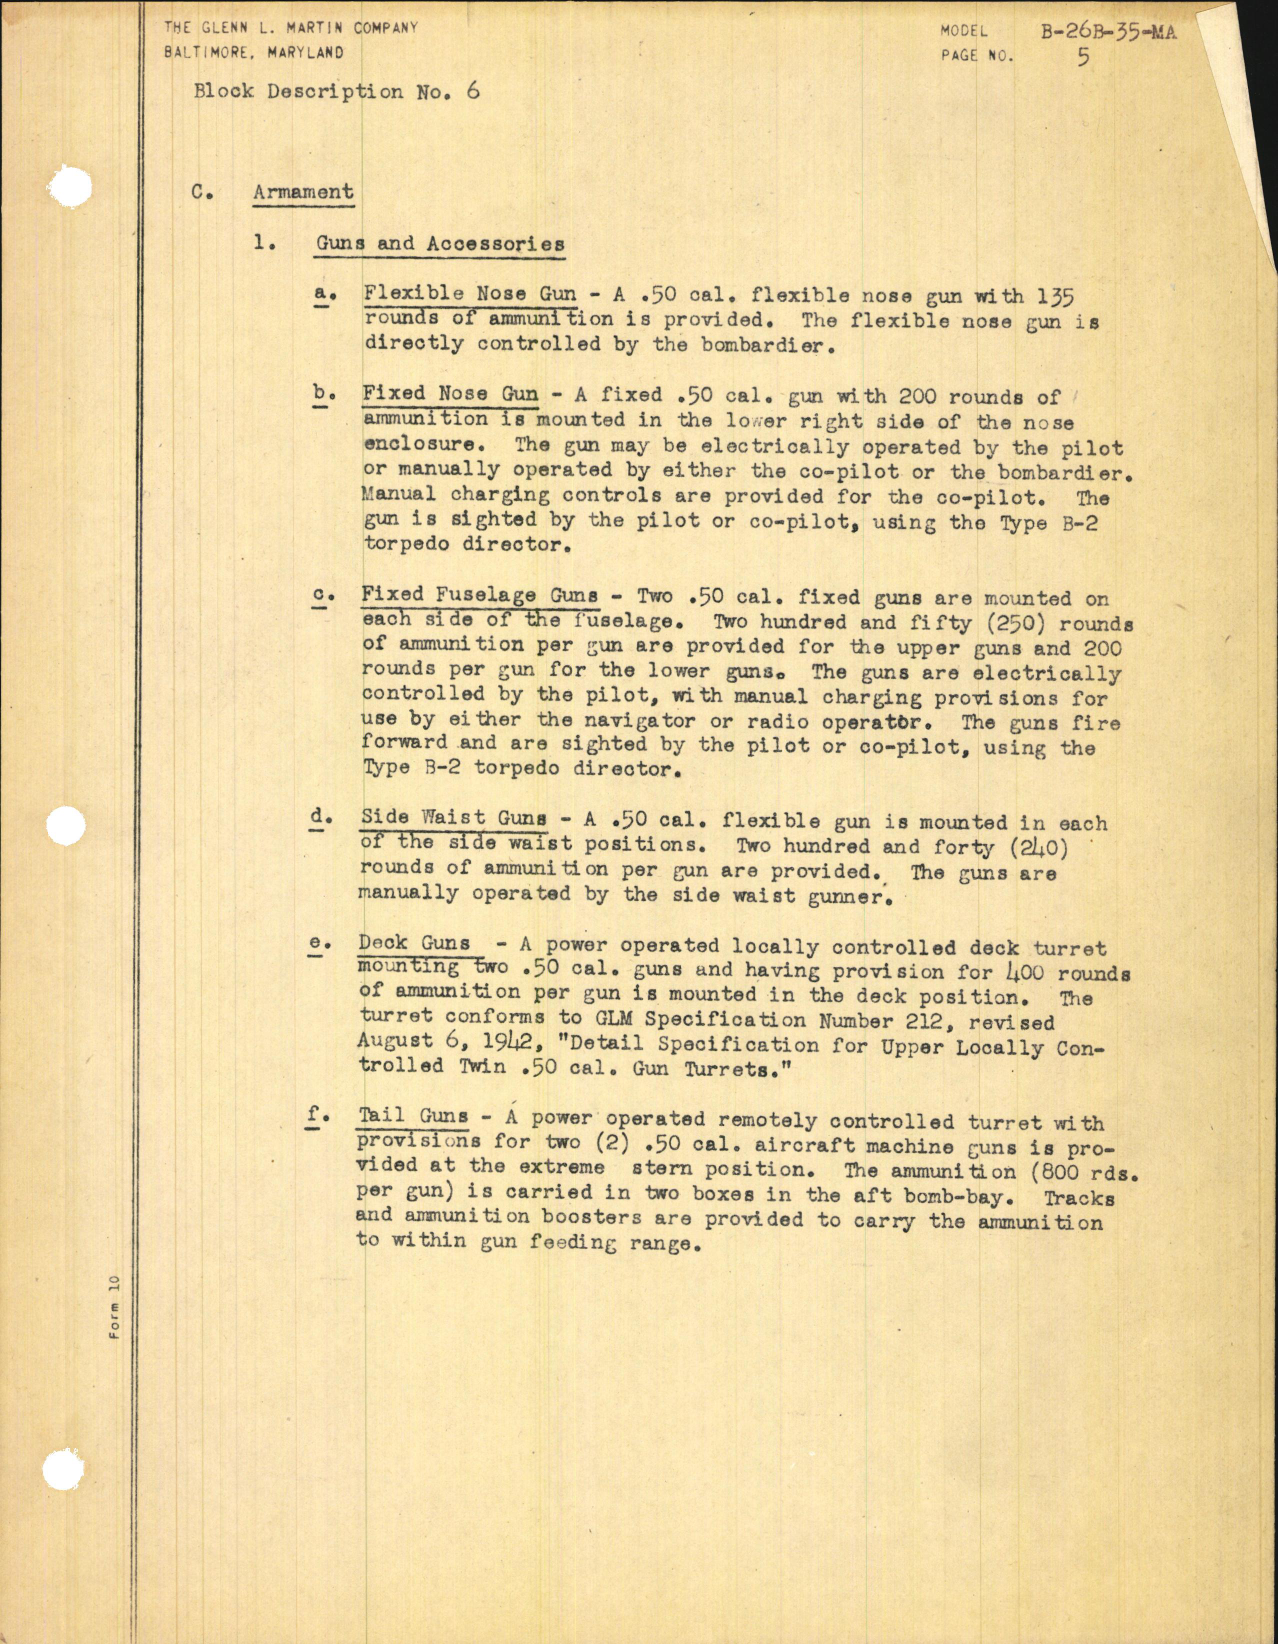 Sample page 13 from AirCorps Library document: Block Description for Air Corps Model B-26B-35-MA Bombardment Airplane